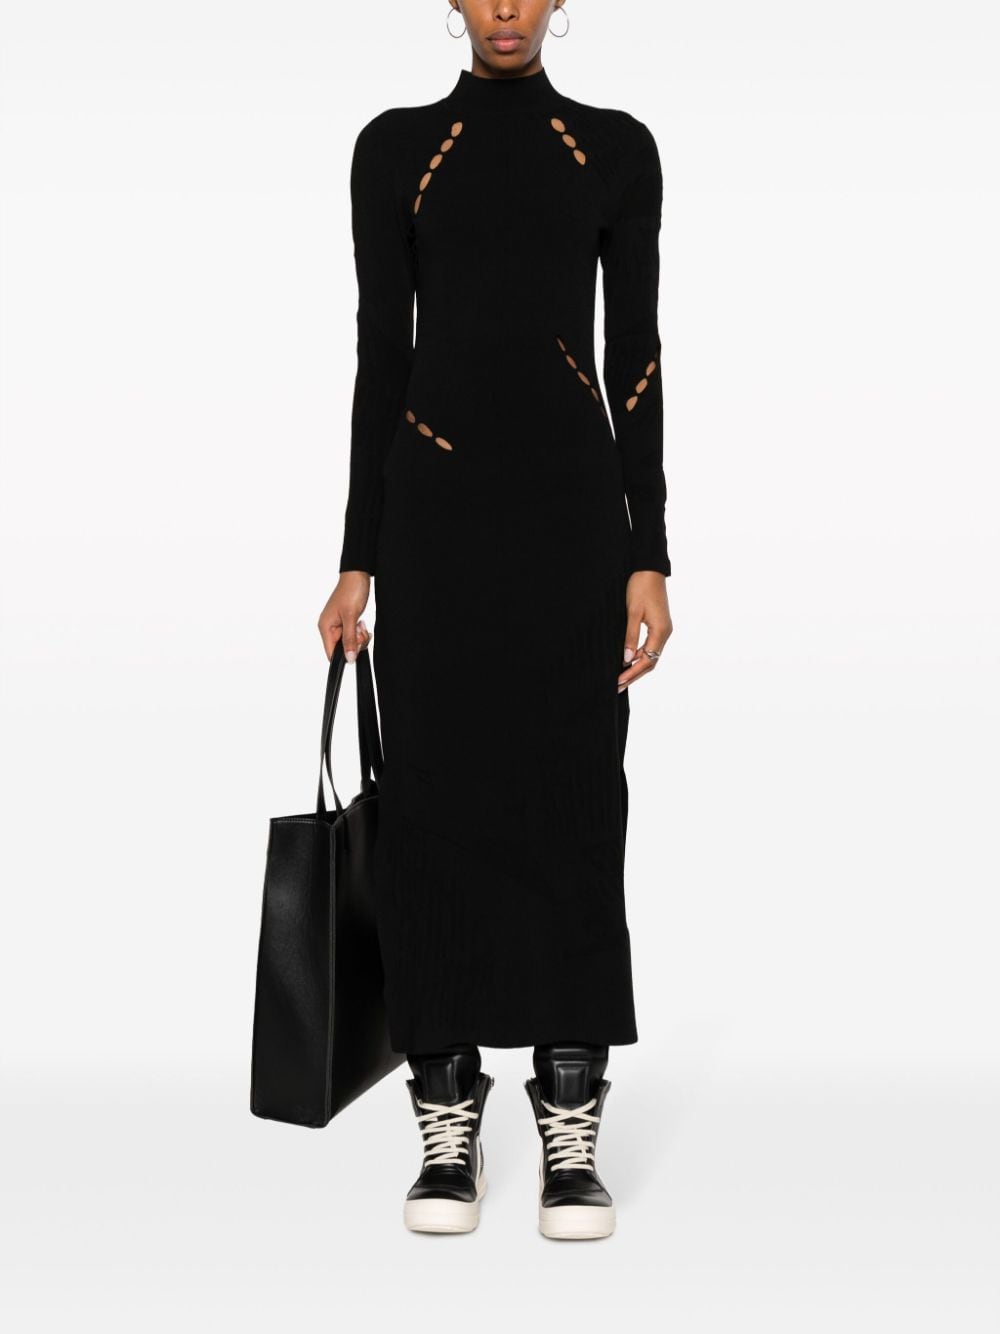 Y-3 Black Cut-Out Knit Dress for Women - FW23 Collection